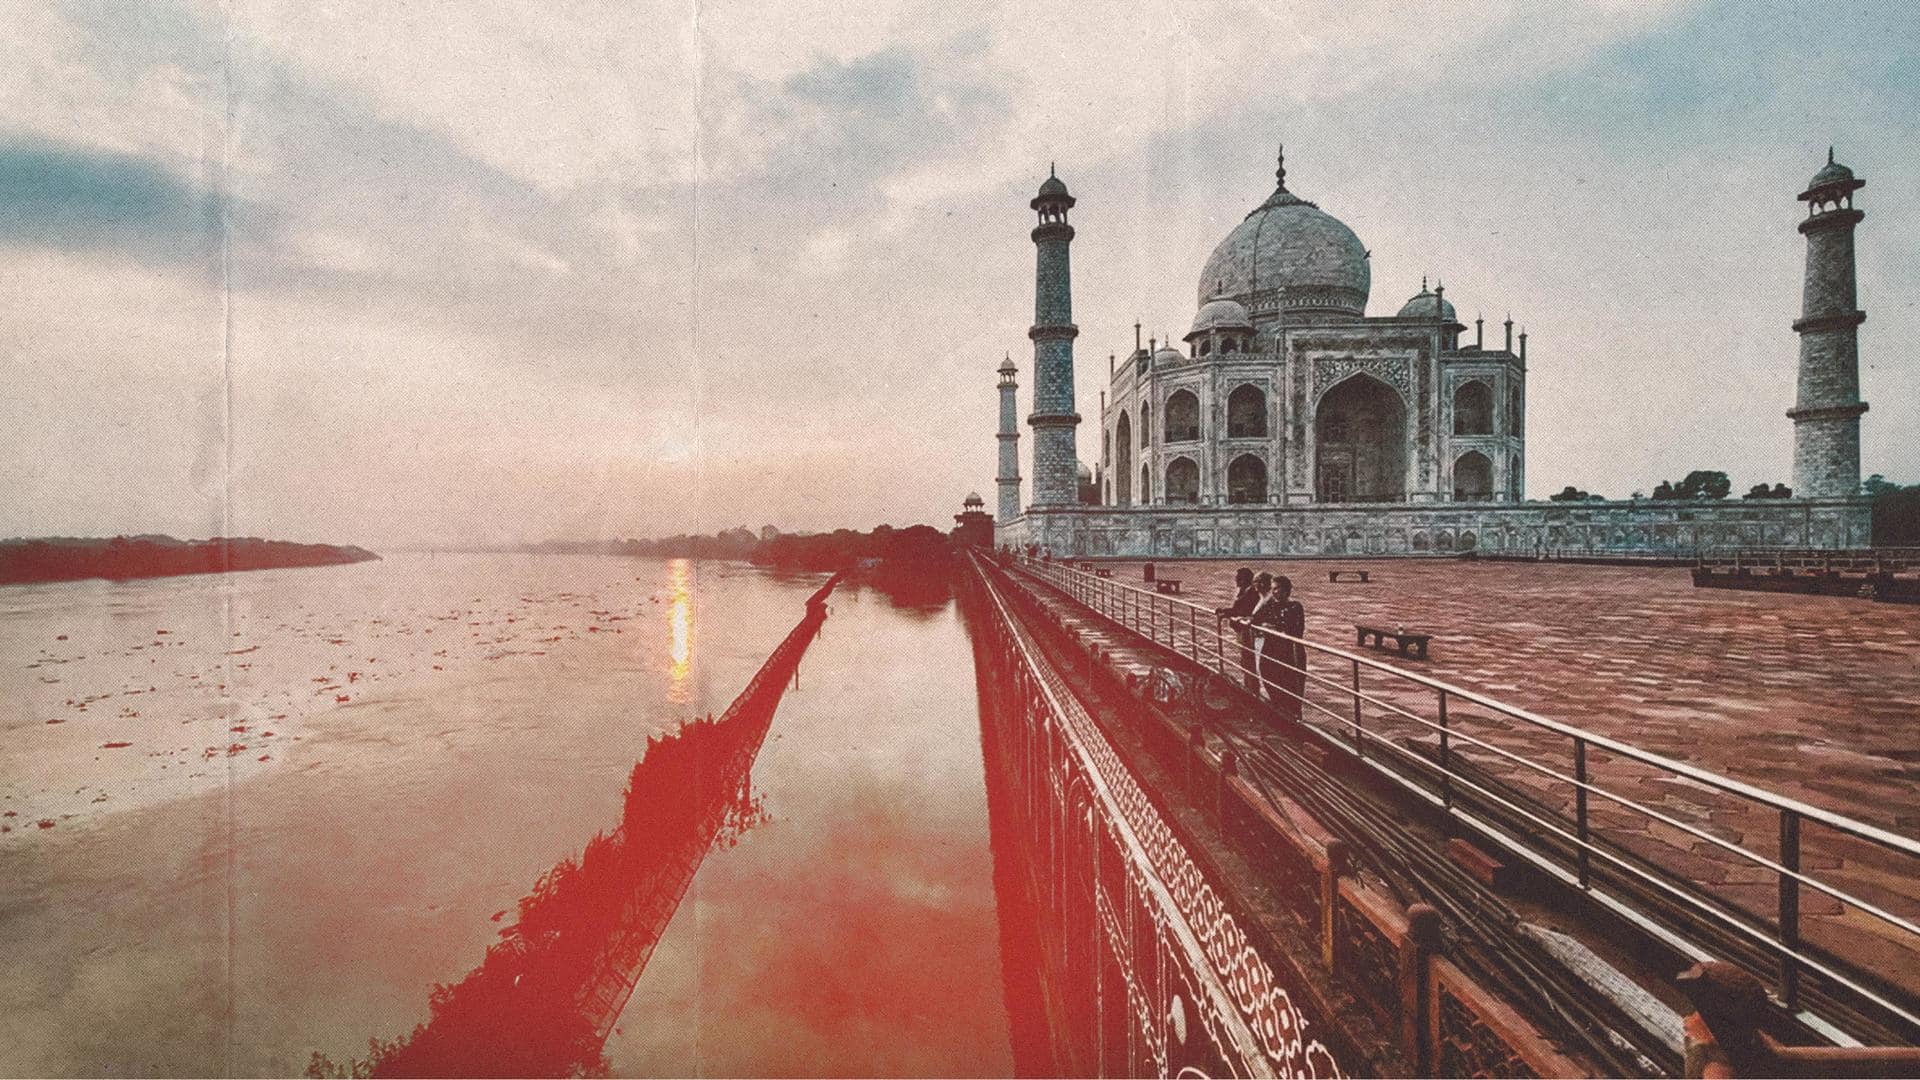 First time in 45 years: Floodwater submerges Taj Mahal garden